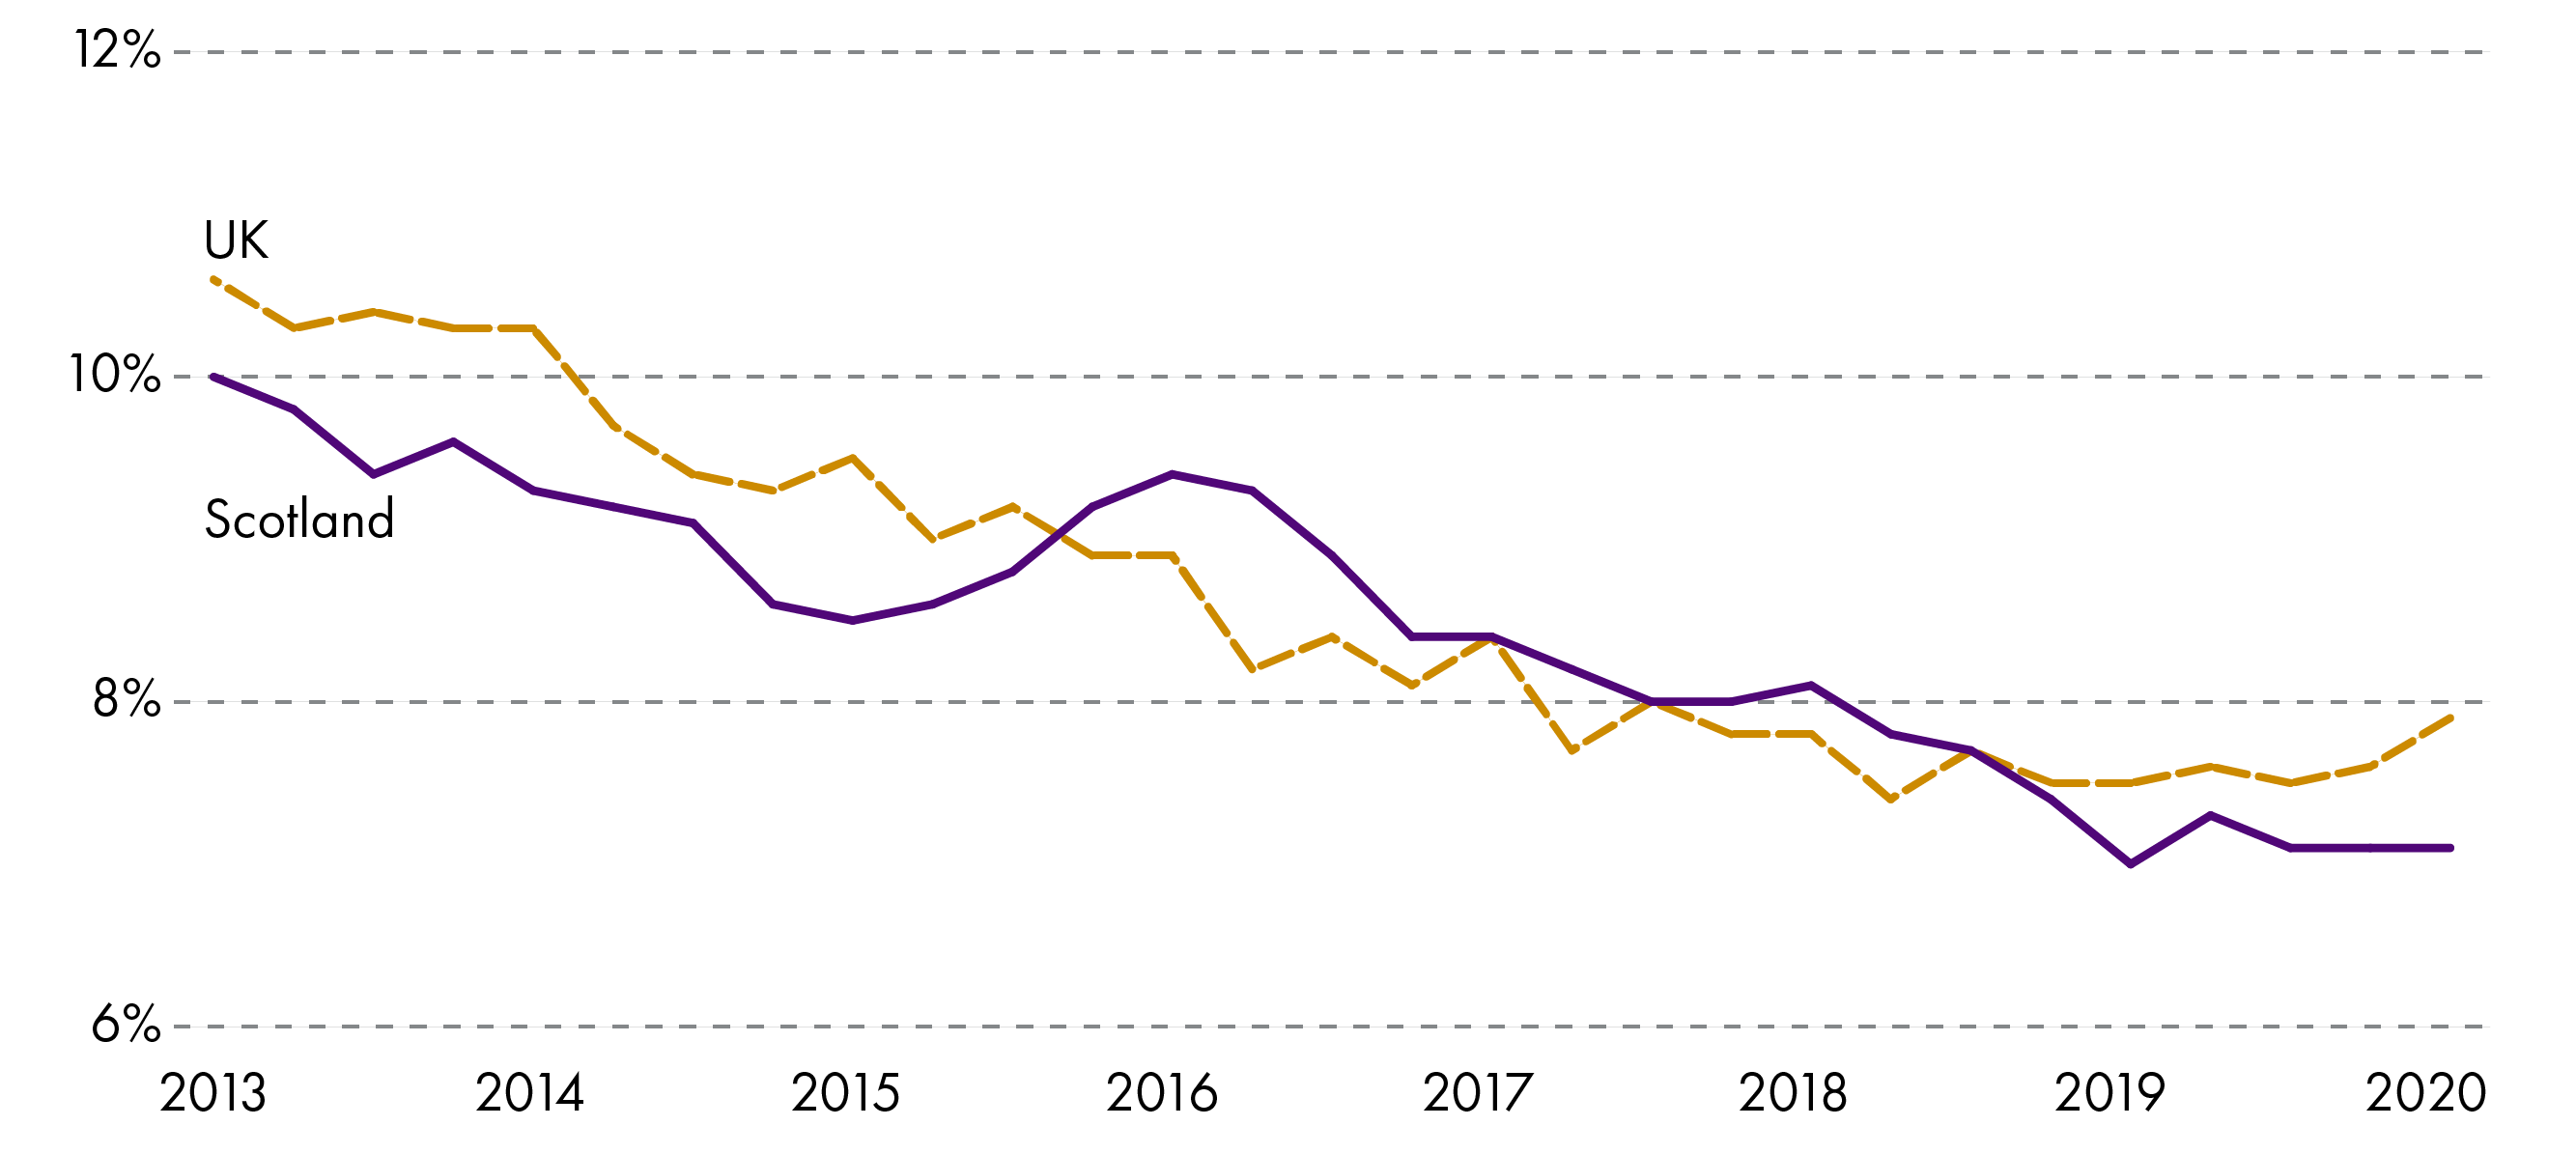 Underemployment has been measured since 2013, and shows a steady decline in Scotland and the UK. In general the rates in Scotland and the UK have moved in tandem, and since 2019 appear to have levelled out. 